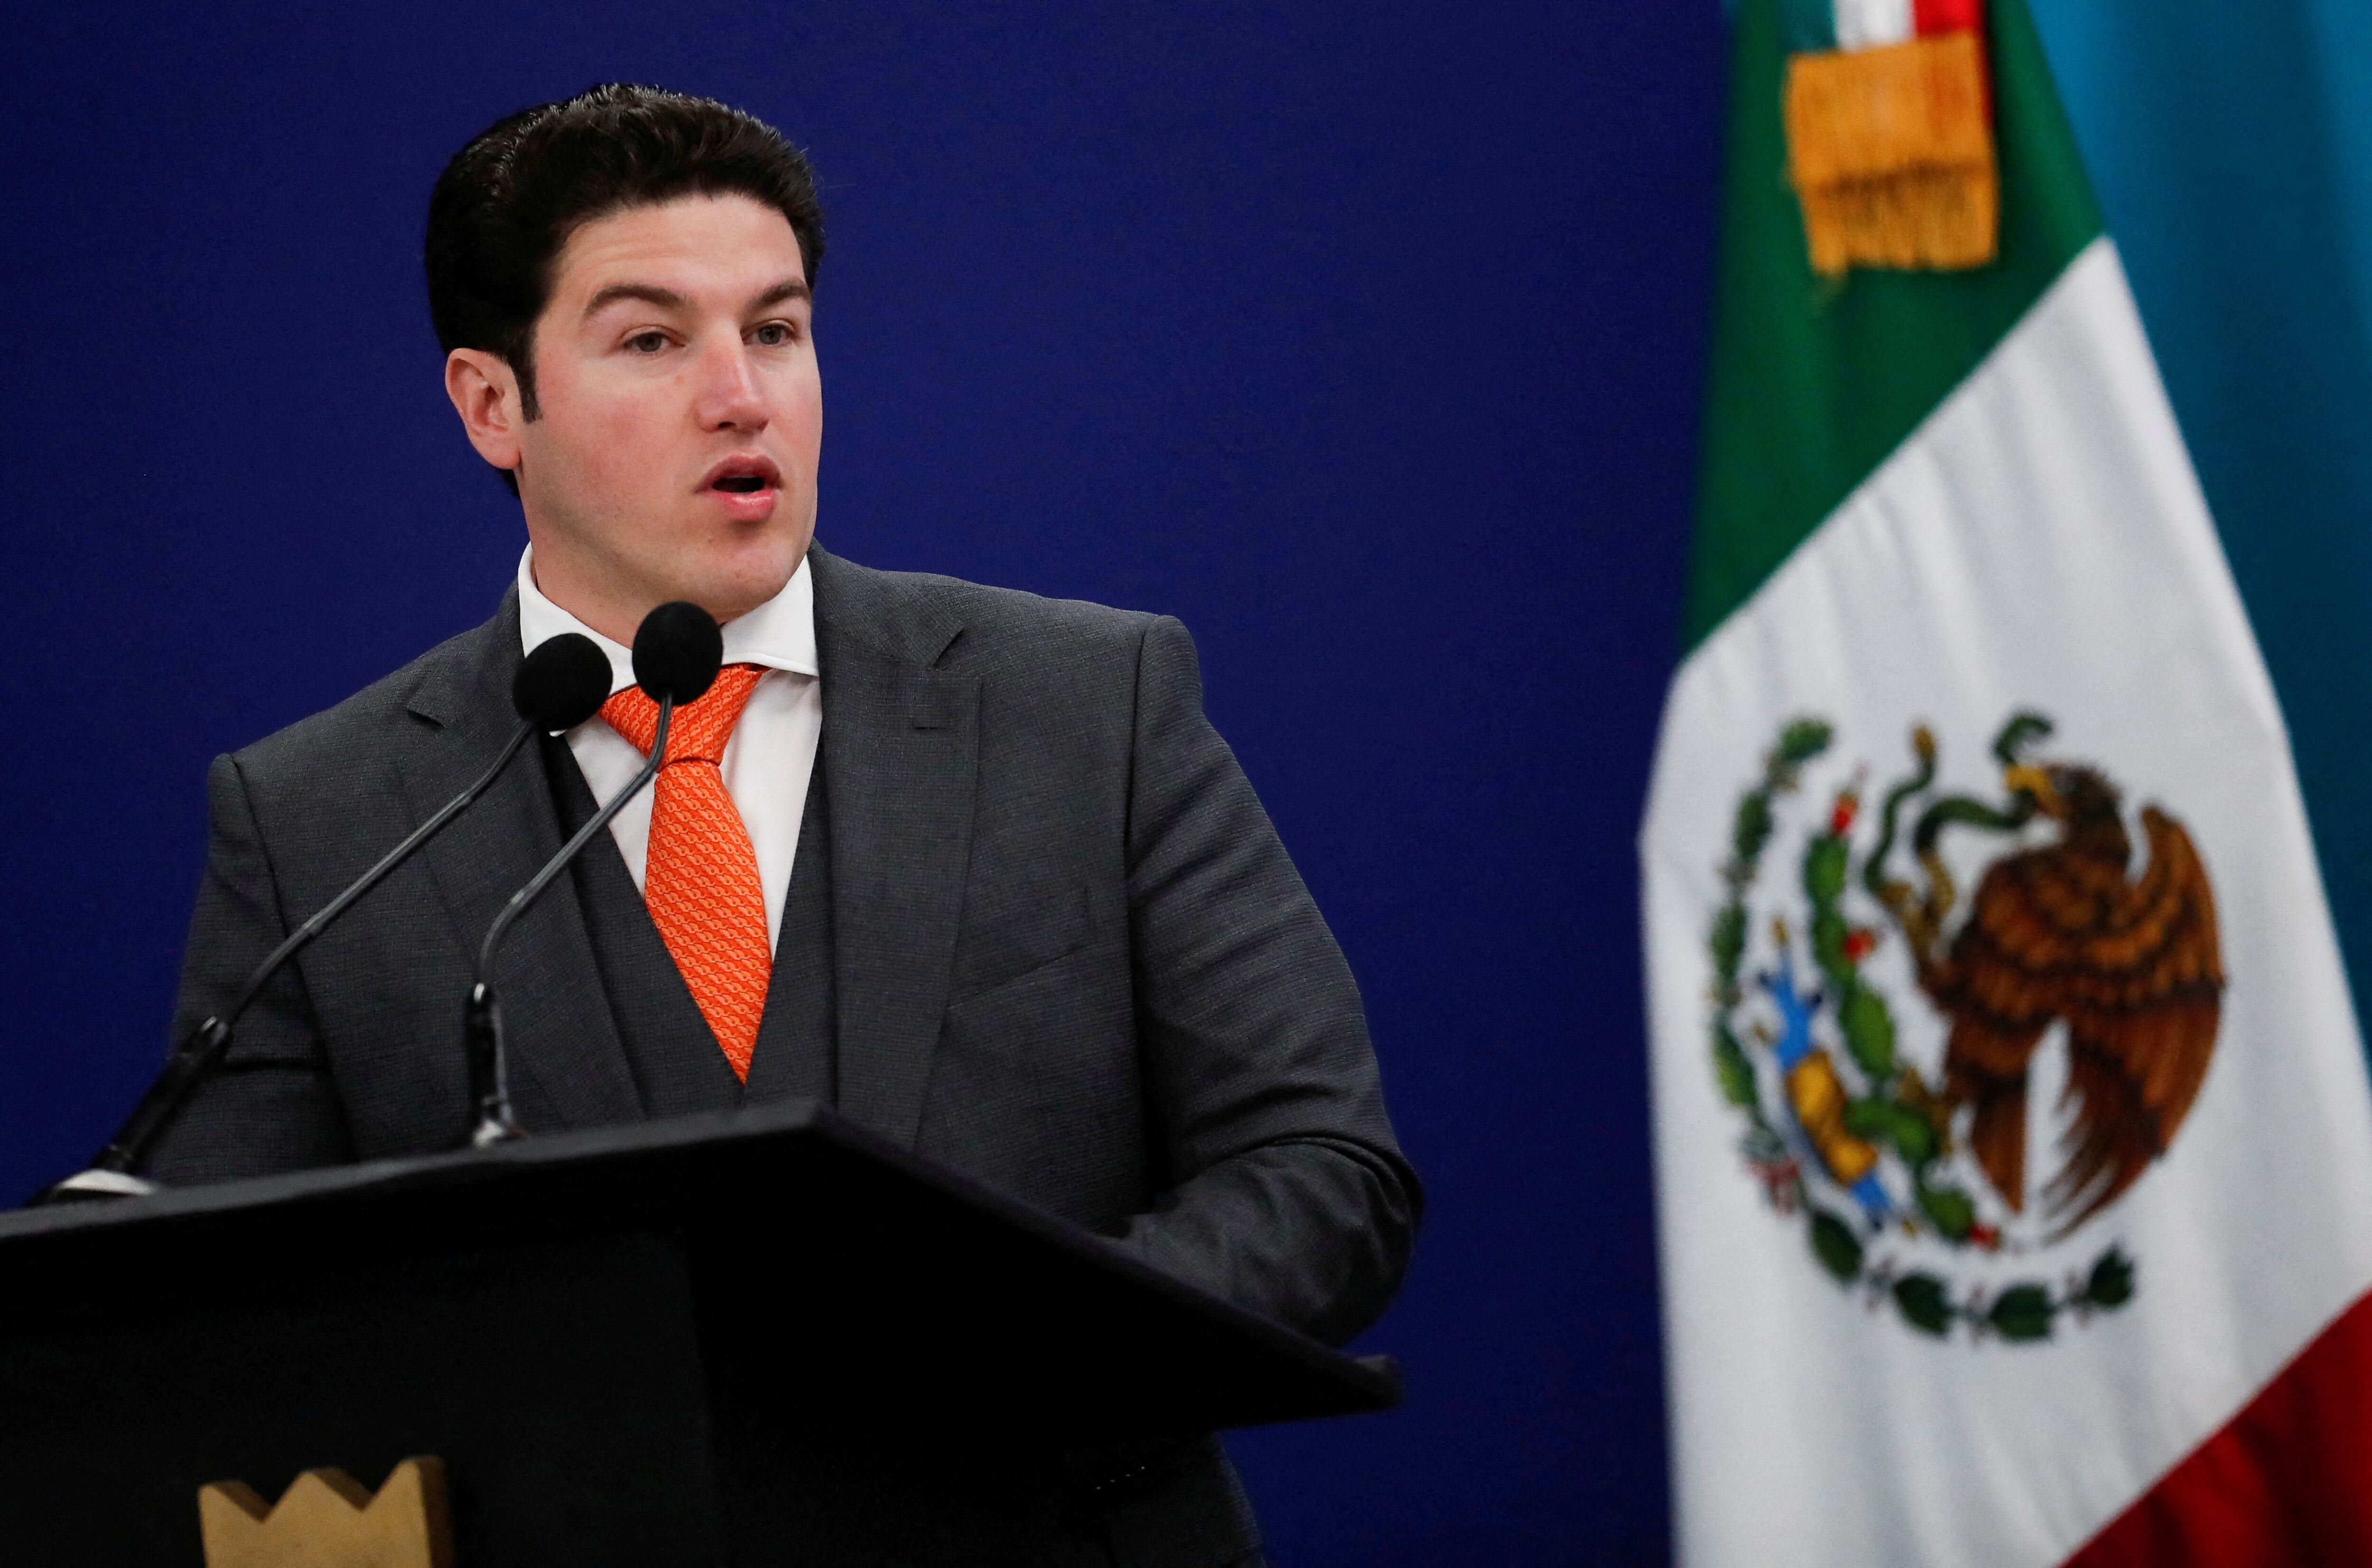 FILE PHOTO: Governor of Nuevo Leon state Samuel Garcia speaks during a school equipment delivery event at the Prepa Tec high school, in Monterrey, Mexico April 25, 2023. REUTERS/Daniel Becerril/File Photo